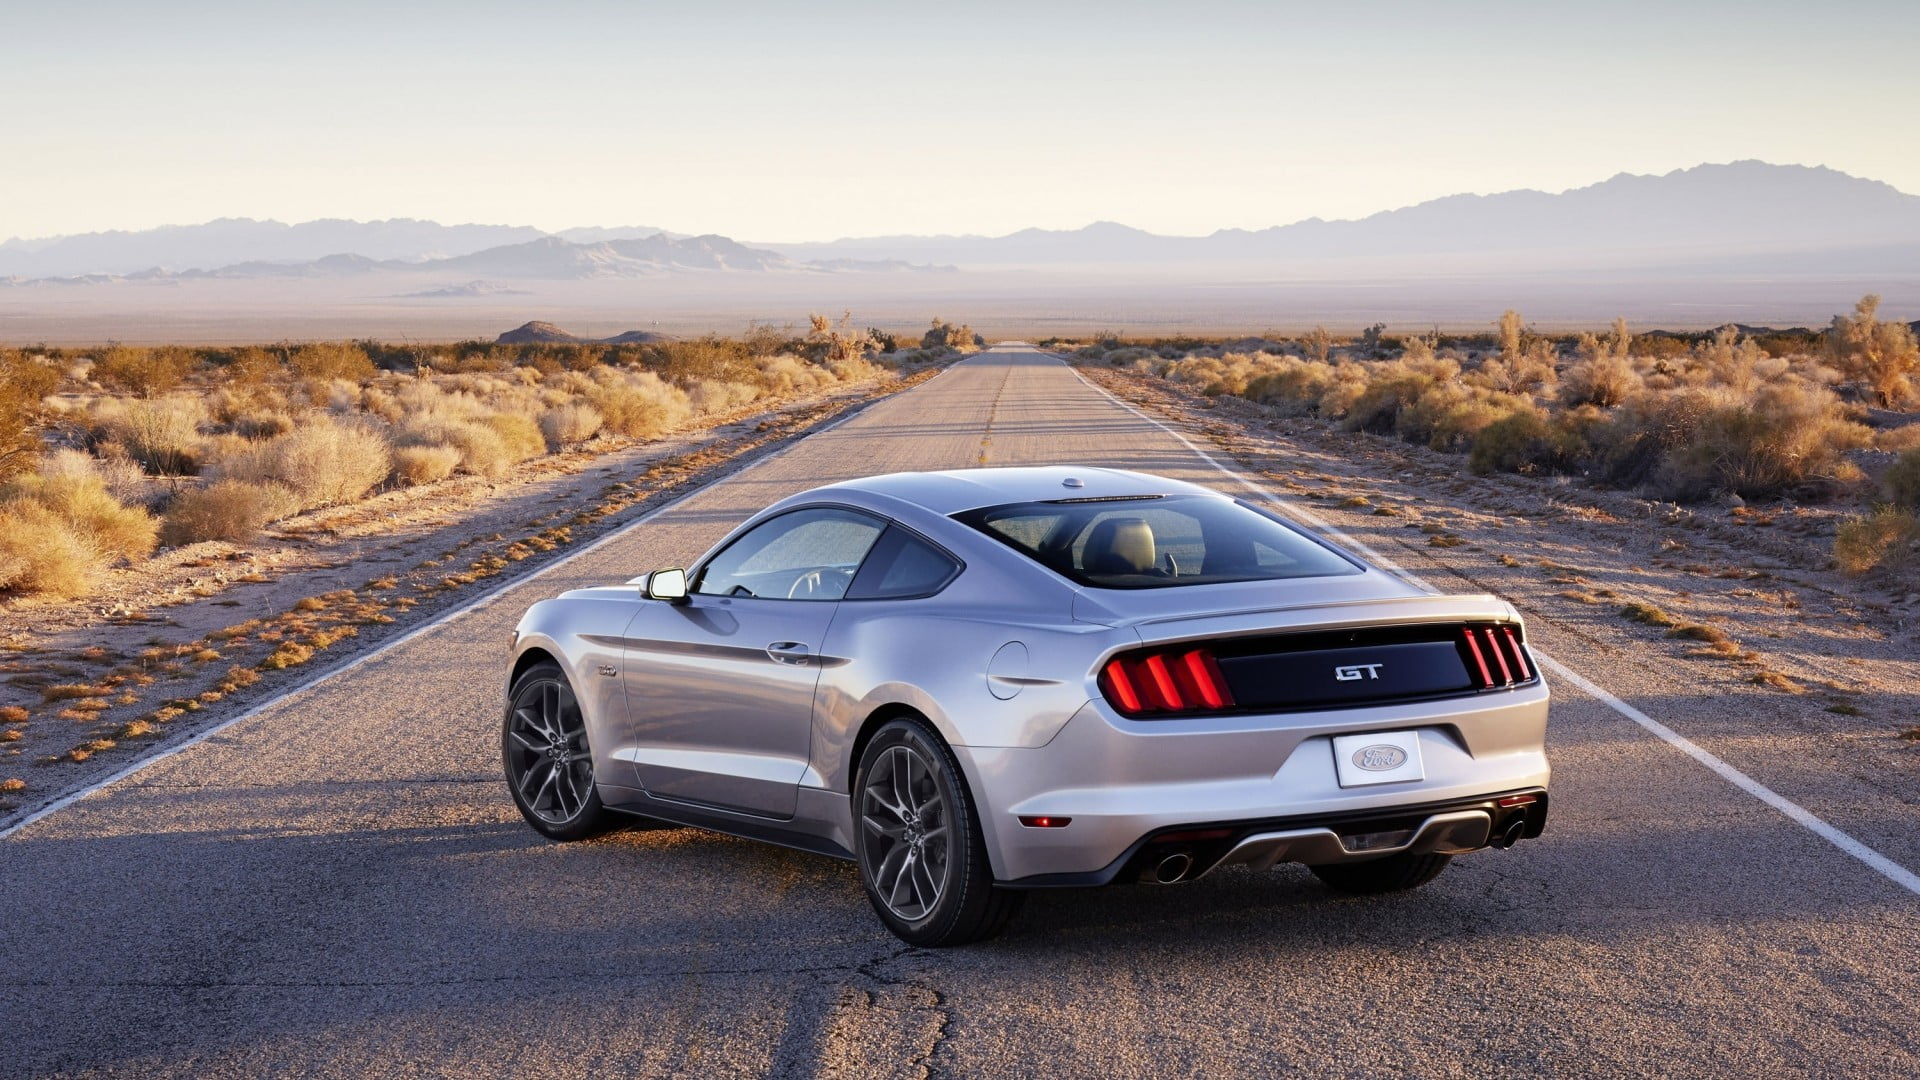 Silver Coupe Ion Road Ford Ford Mustang Gt 2015 Hd Wallpaper Wallpaper Flare